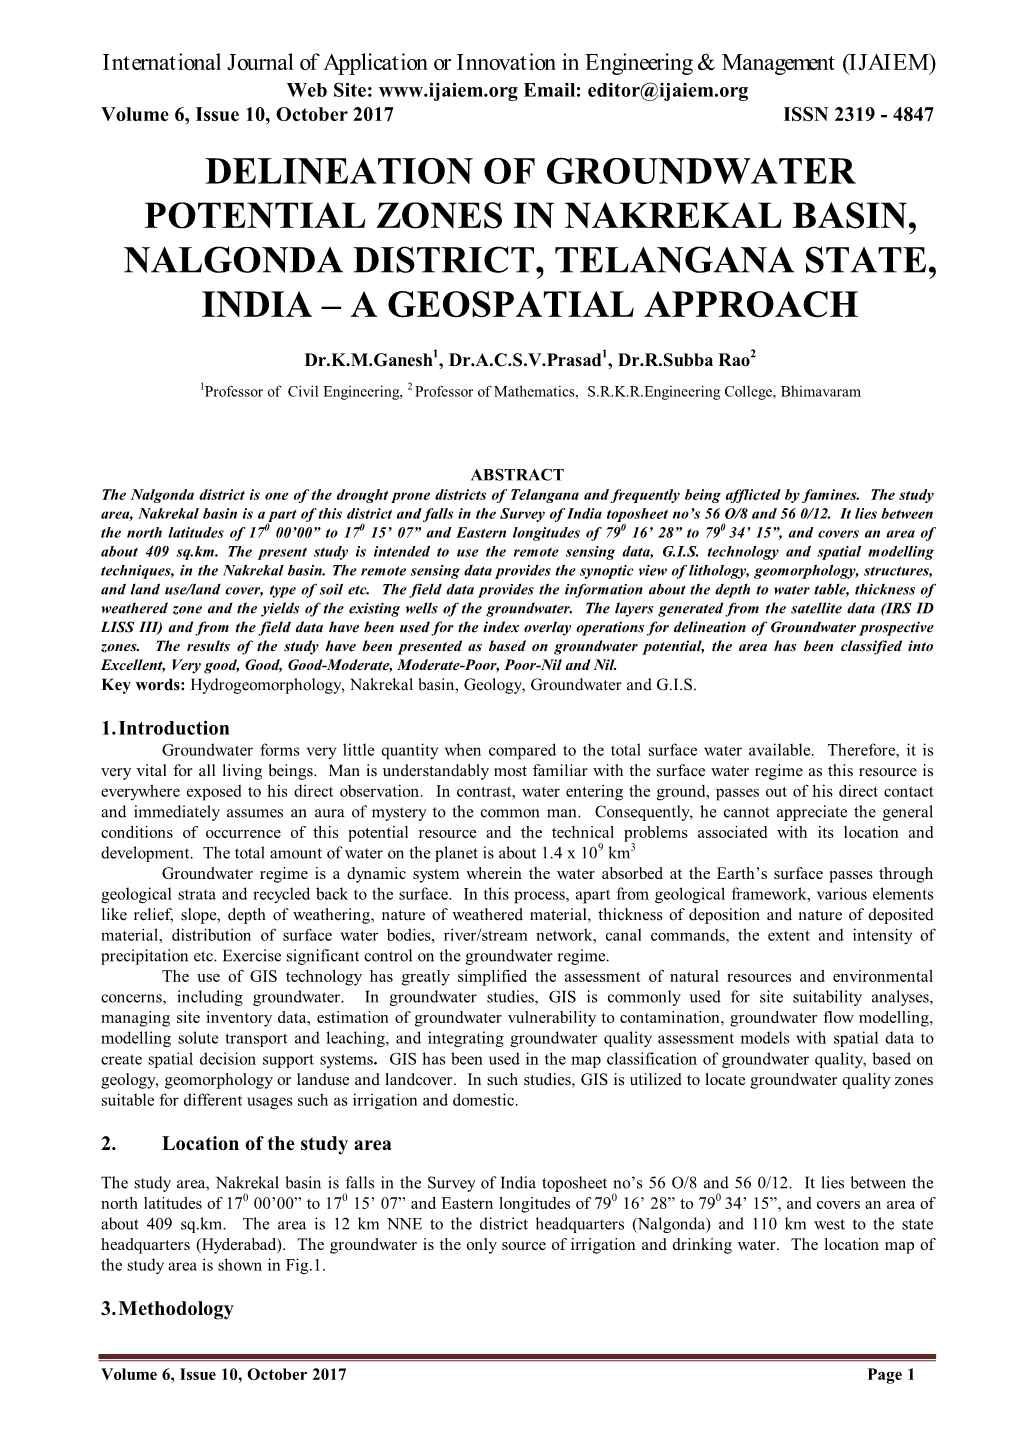 Delineation of Groundwater Potential Zones in Nakrekal Basin, Nalgonda District, Telangana State, India – a Geospatial Approach